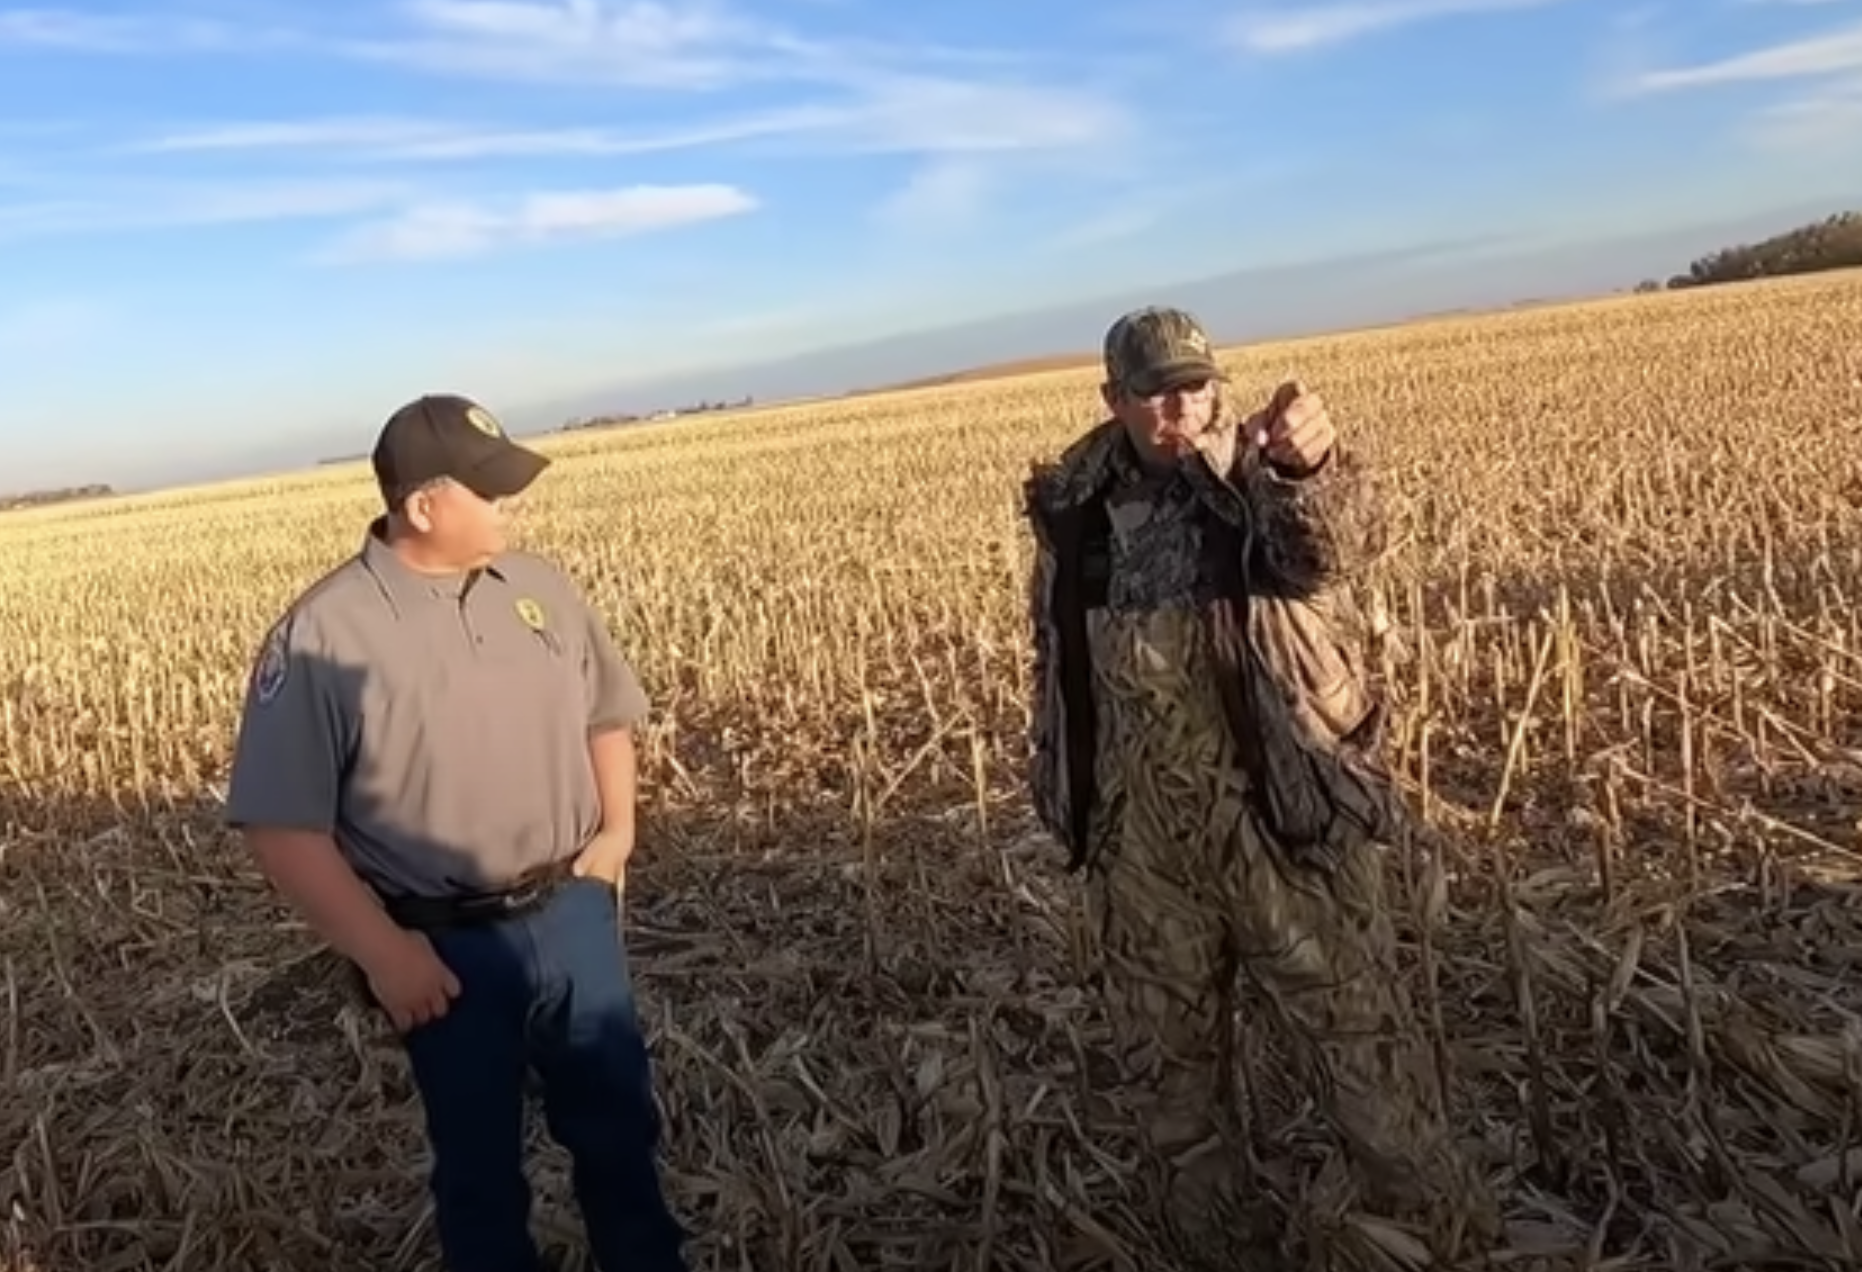 Landowner in “I Own the F*cking Land” Video Takes Plea Deal to Avoid Potential Jail Time